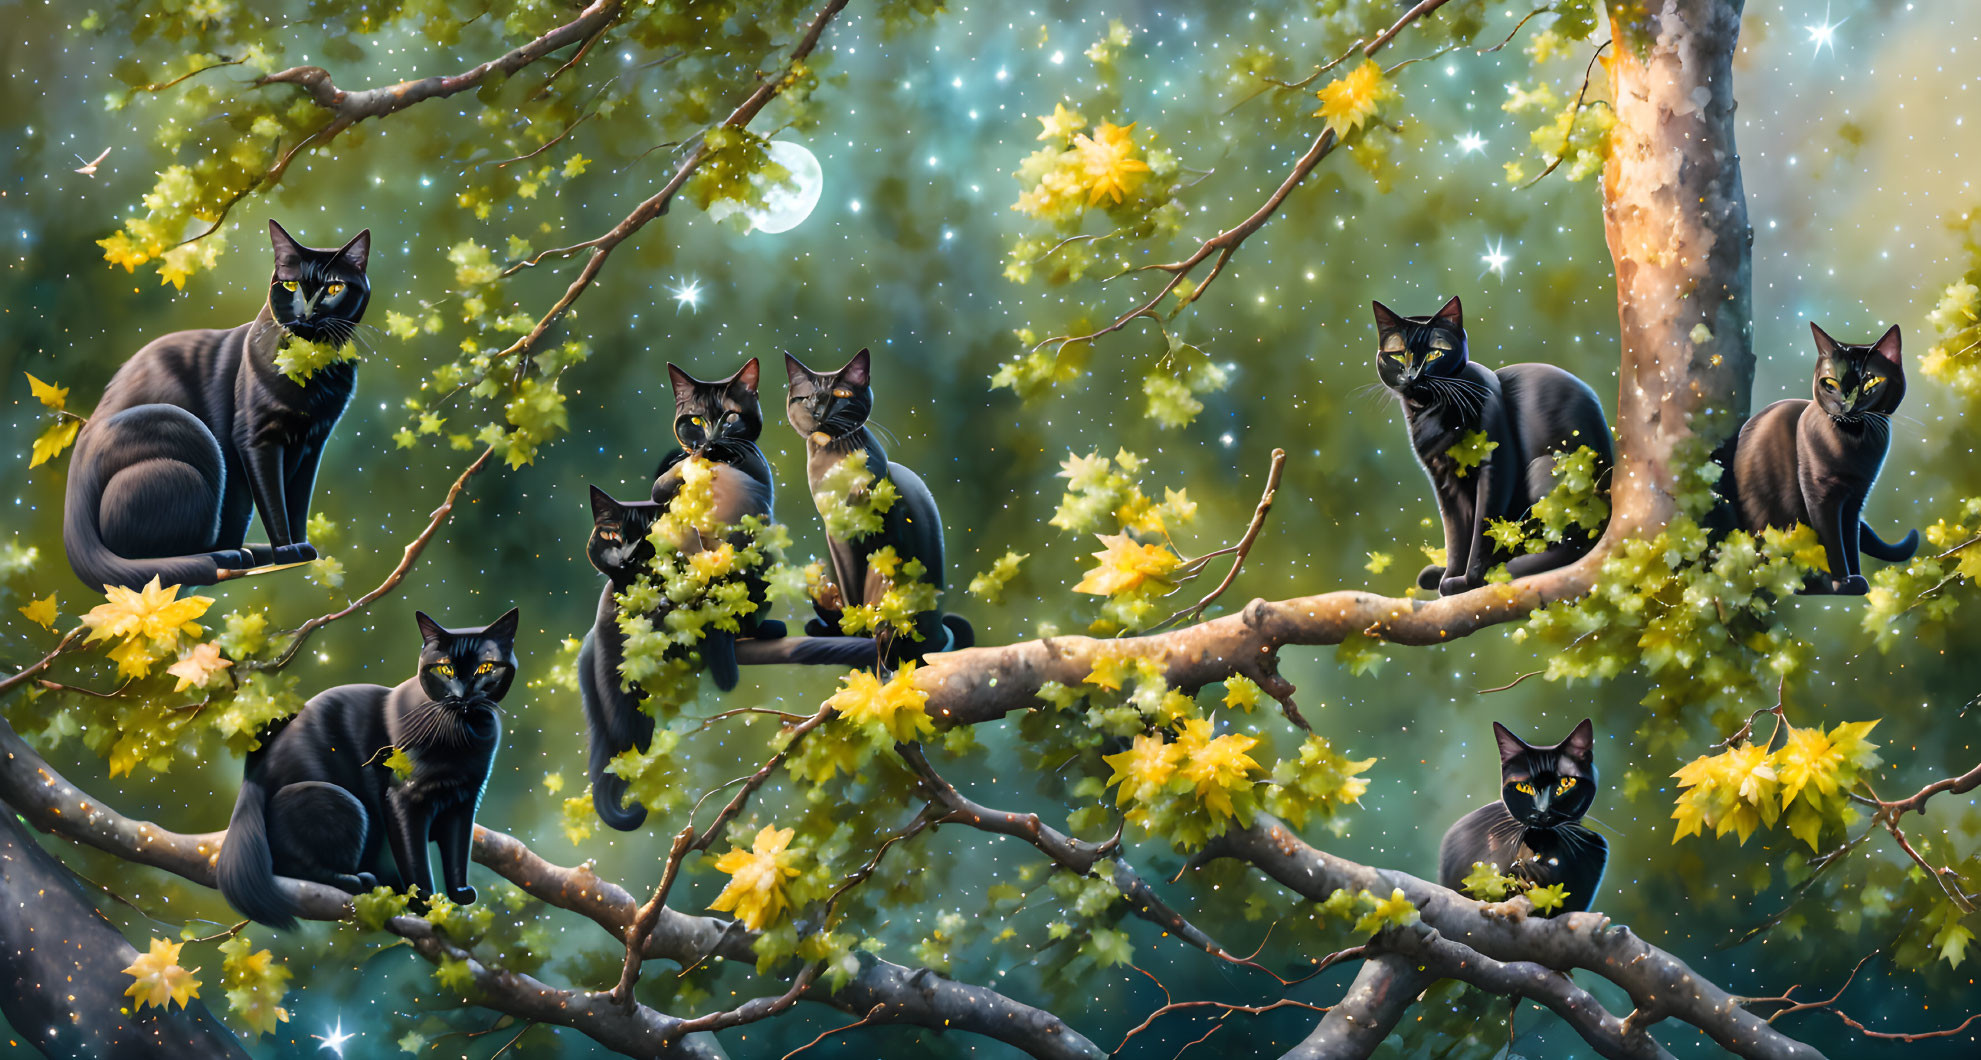 Back view of five black cats sitting on a branch i